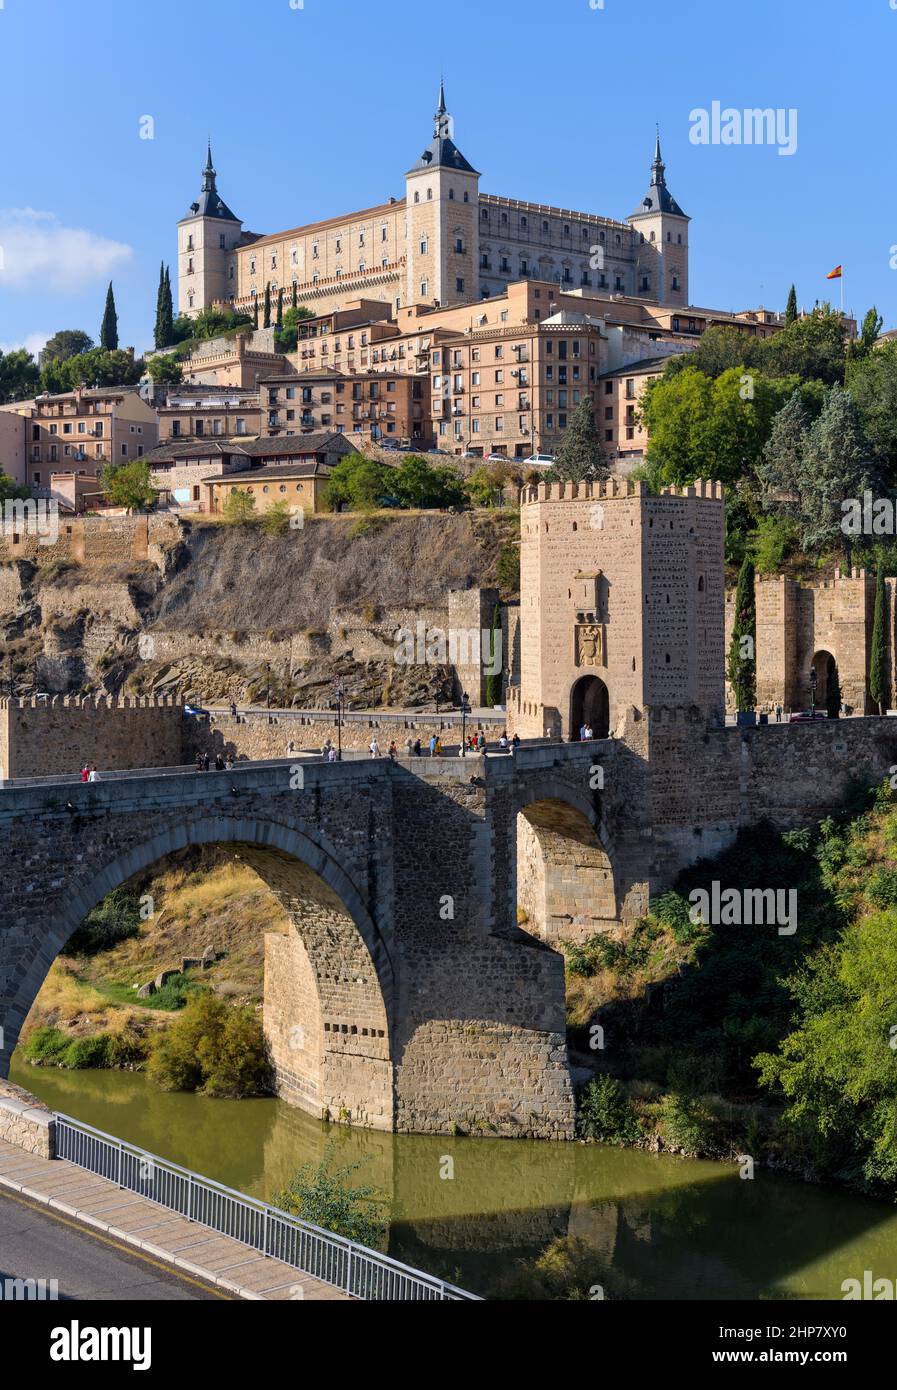 Toledo Spain - Vertical morning view of historic city Toledo at Puente de Alcántara, with Alcázar fortress standing tall at hilltop. Toledo, Spain. Stock Photo